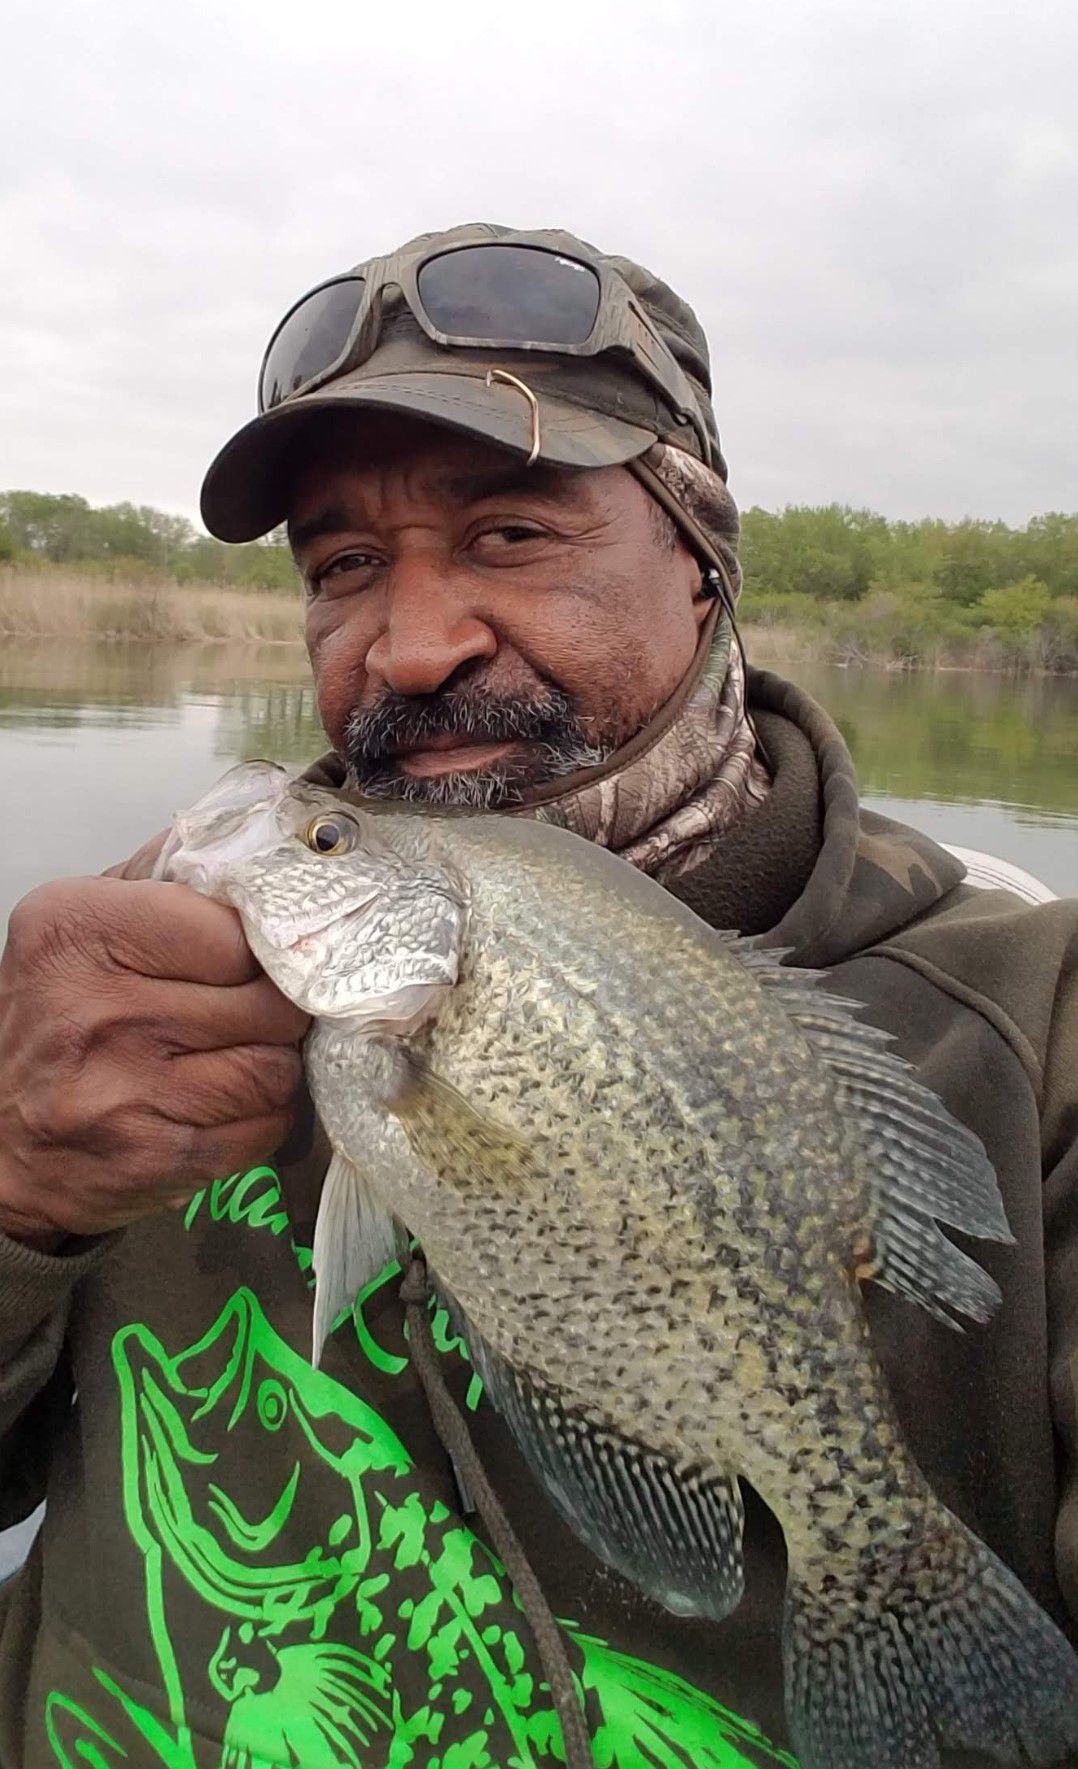 BoRabb Williams with a quality crappie. Provided photo